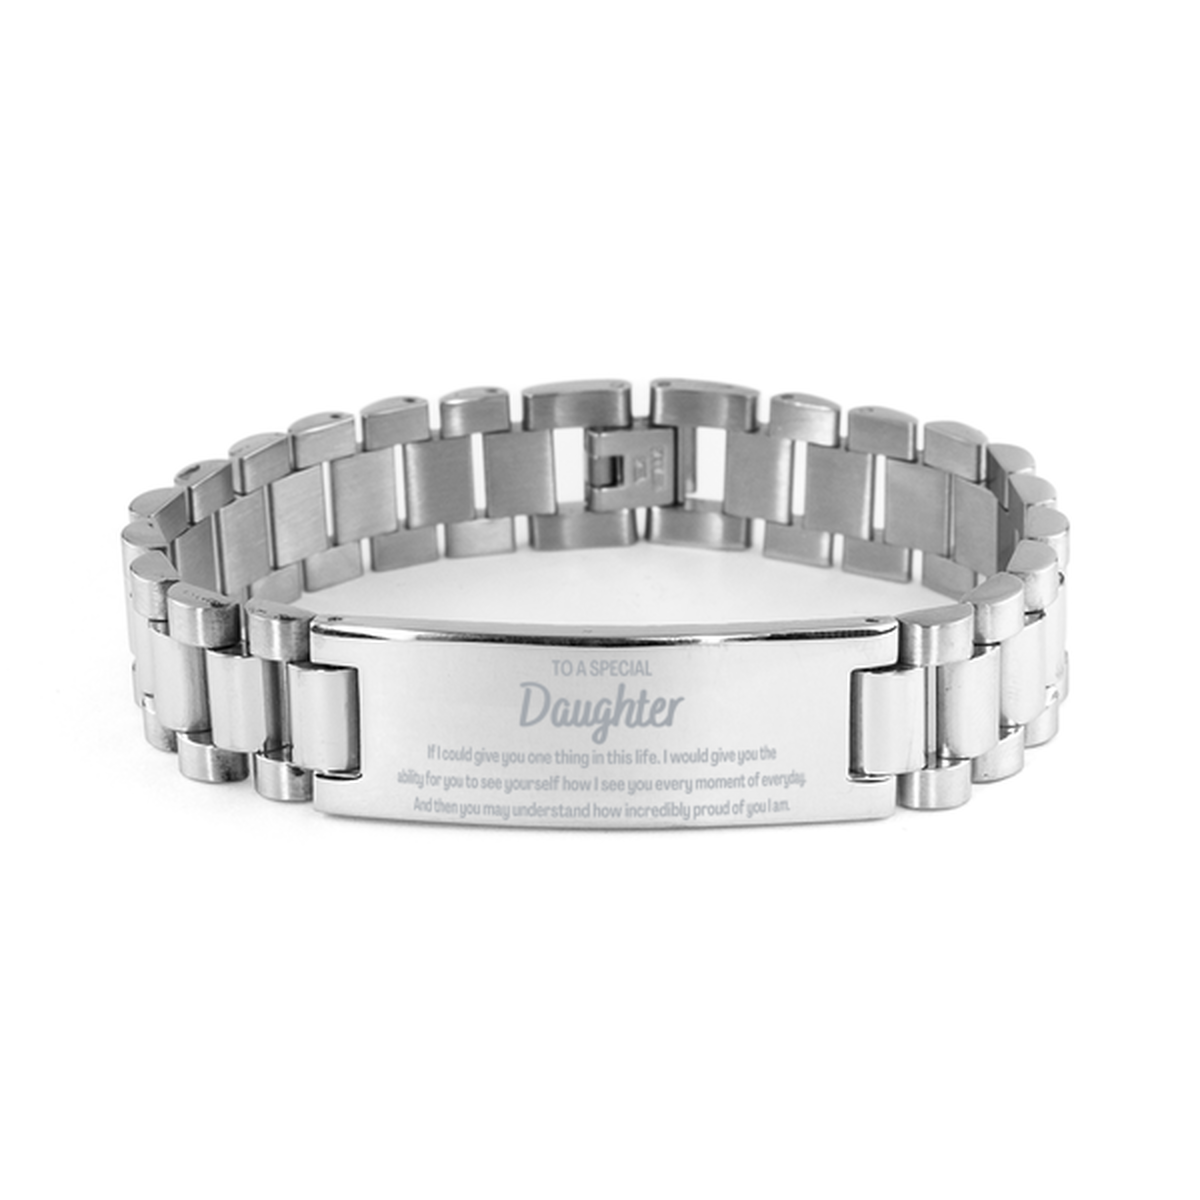 To My Daughter Ladder Stainless Steel Bracelet, Gifts For Daughter Engraved, Inspirational Gifts for Christmas Birthday, Epic Gifts for Daughter To A Special Daughter how incredibly proud of you I am